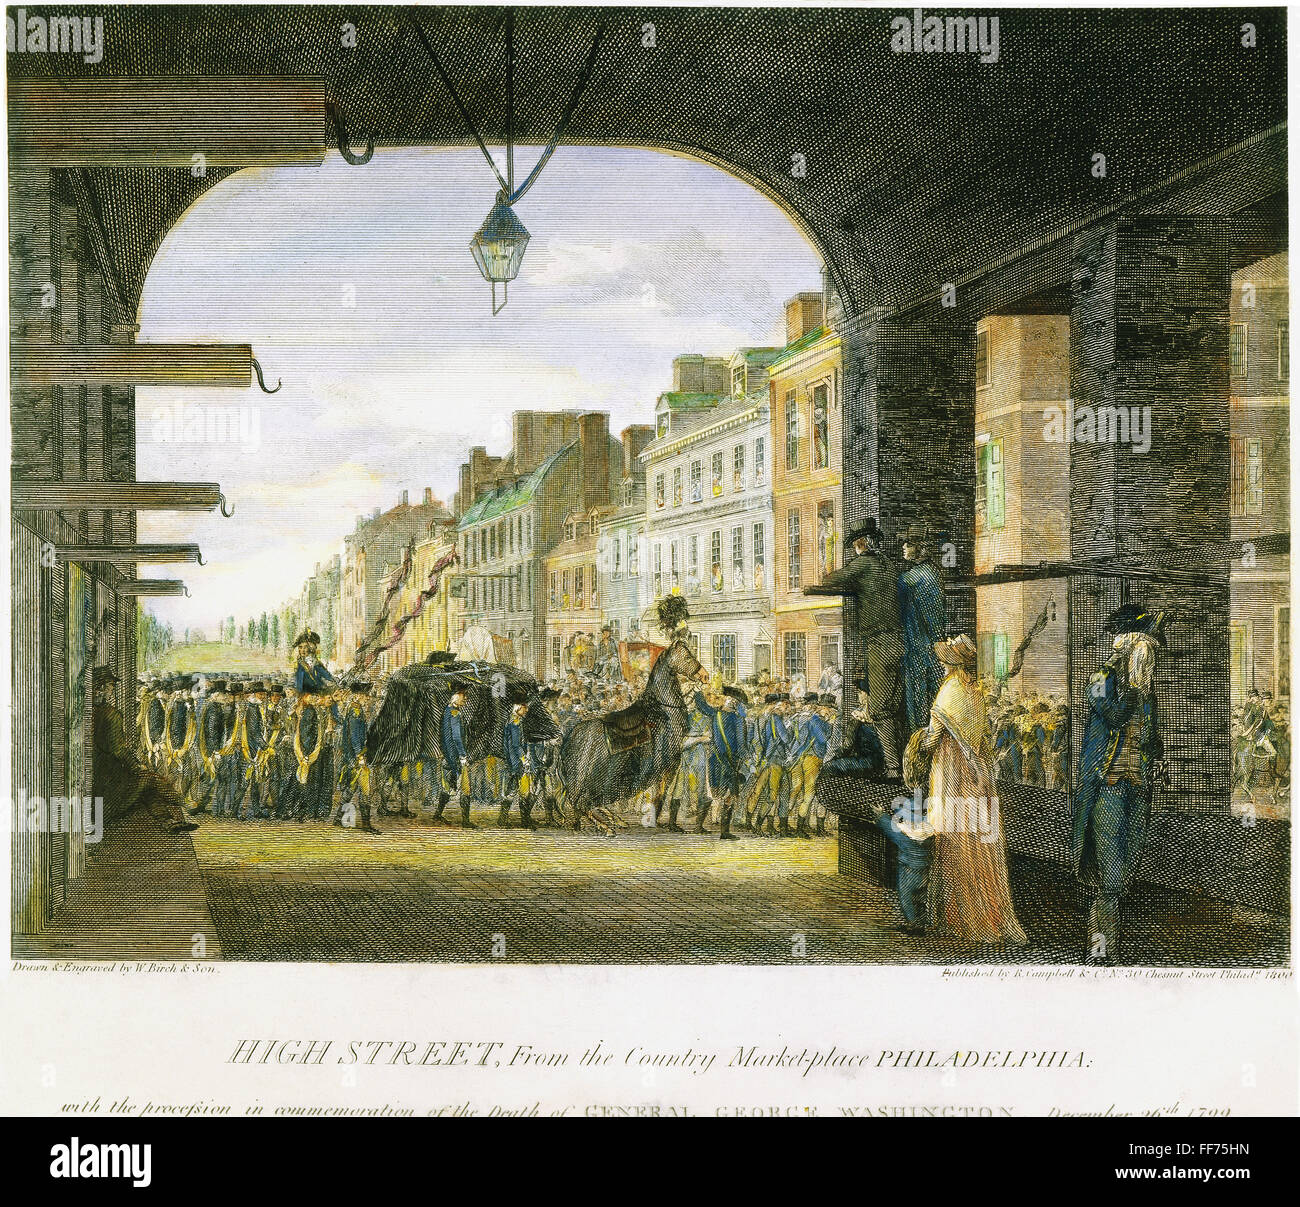 HIGH STREET, PHILADELPHIA. /nHigh Street, from the country market-place, Philadelphia, with the procession in commemoration of the death of President George Washington, 26 December 1799. Color engraving by William Birch & Son, 1800. Stock Photo